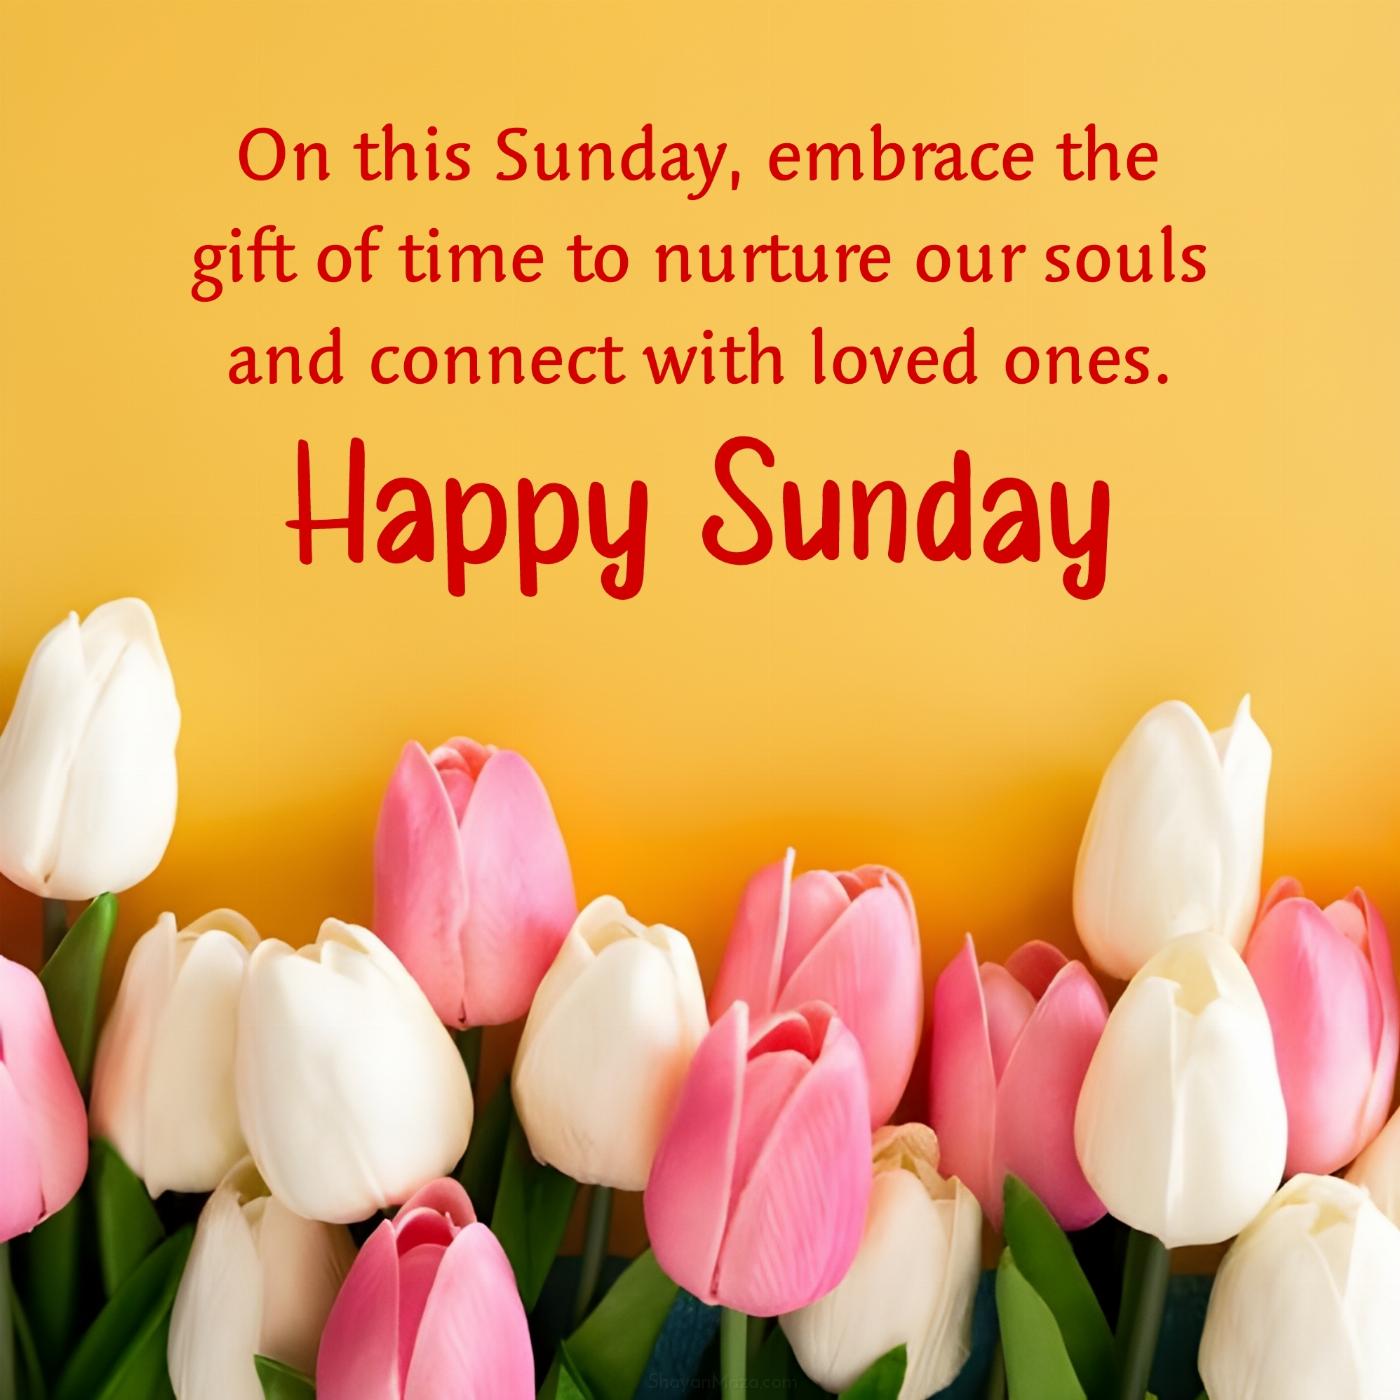 On this Sunday embrace the gift of time to nurture our souls